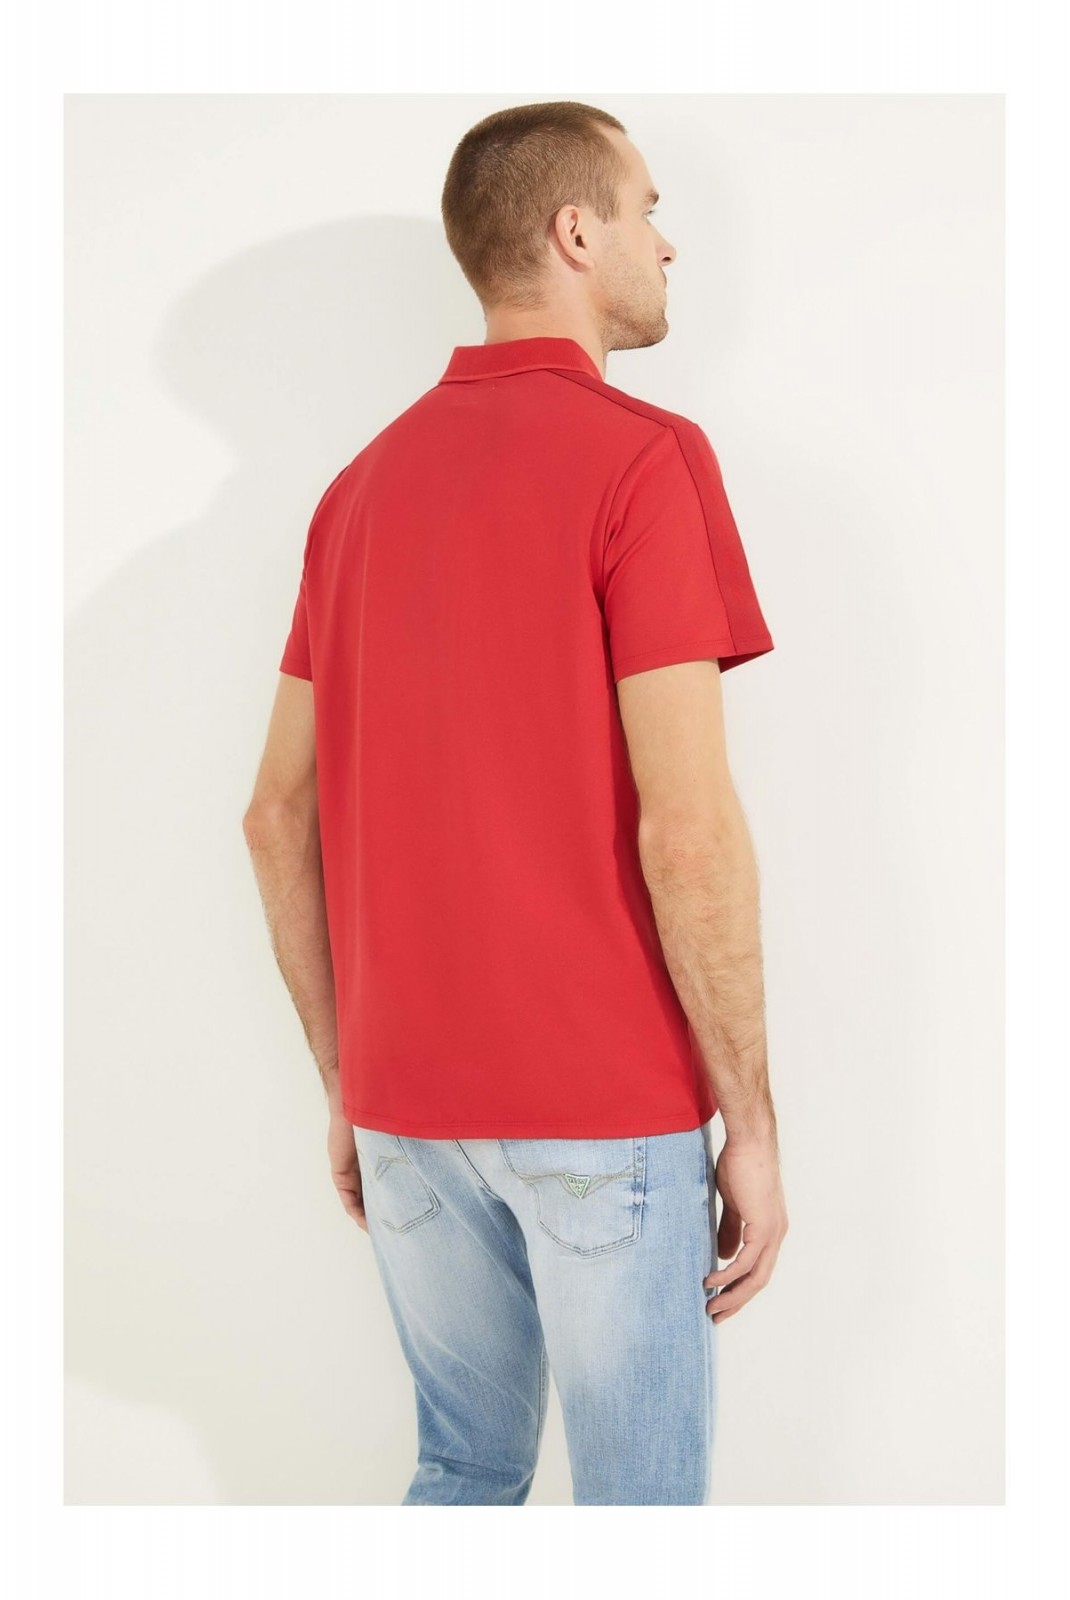 Polo à bandes logo Guess jeans G532 CHILI RED M2YP25 KARS0